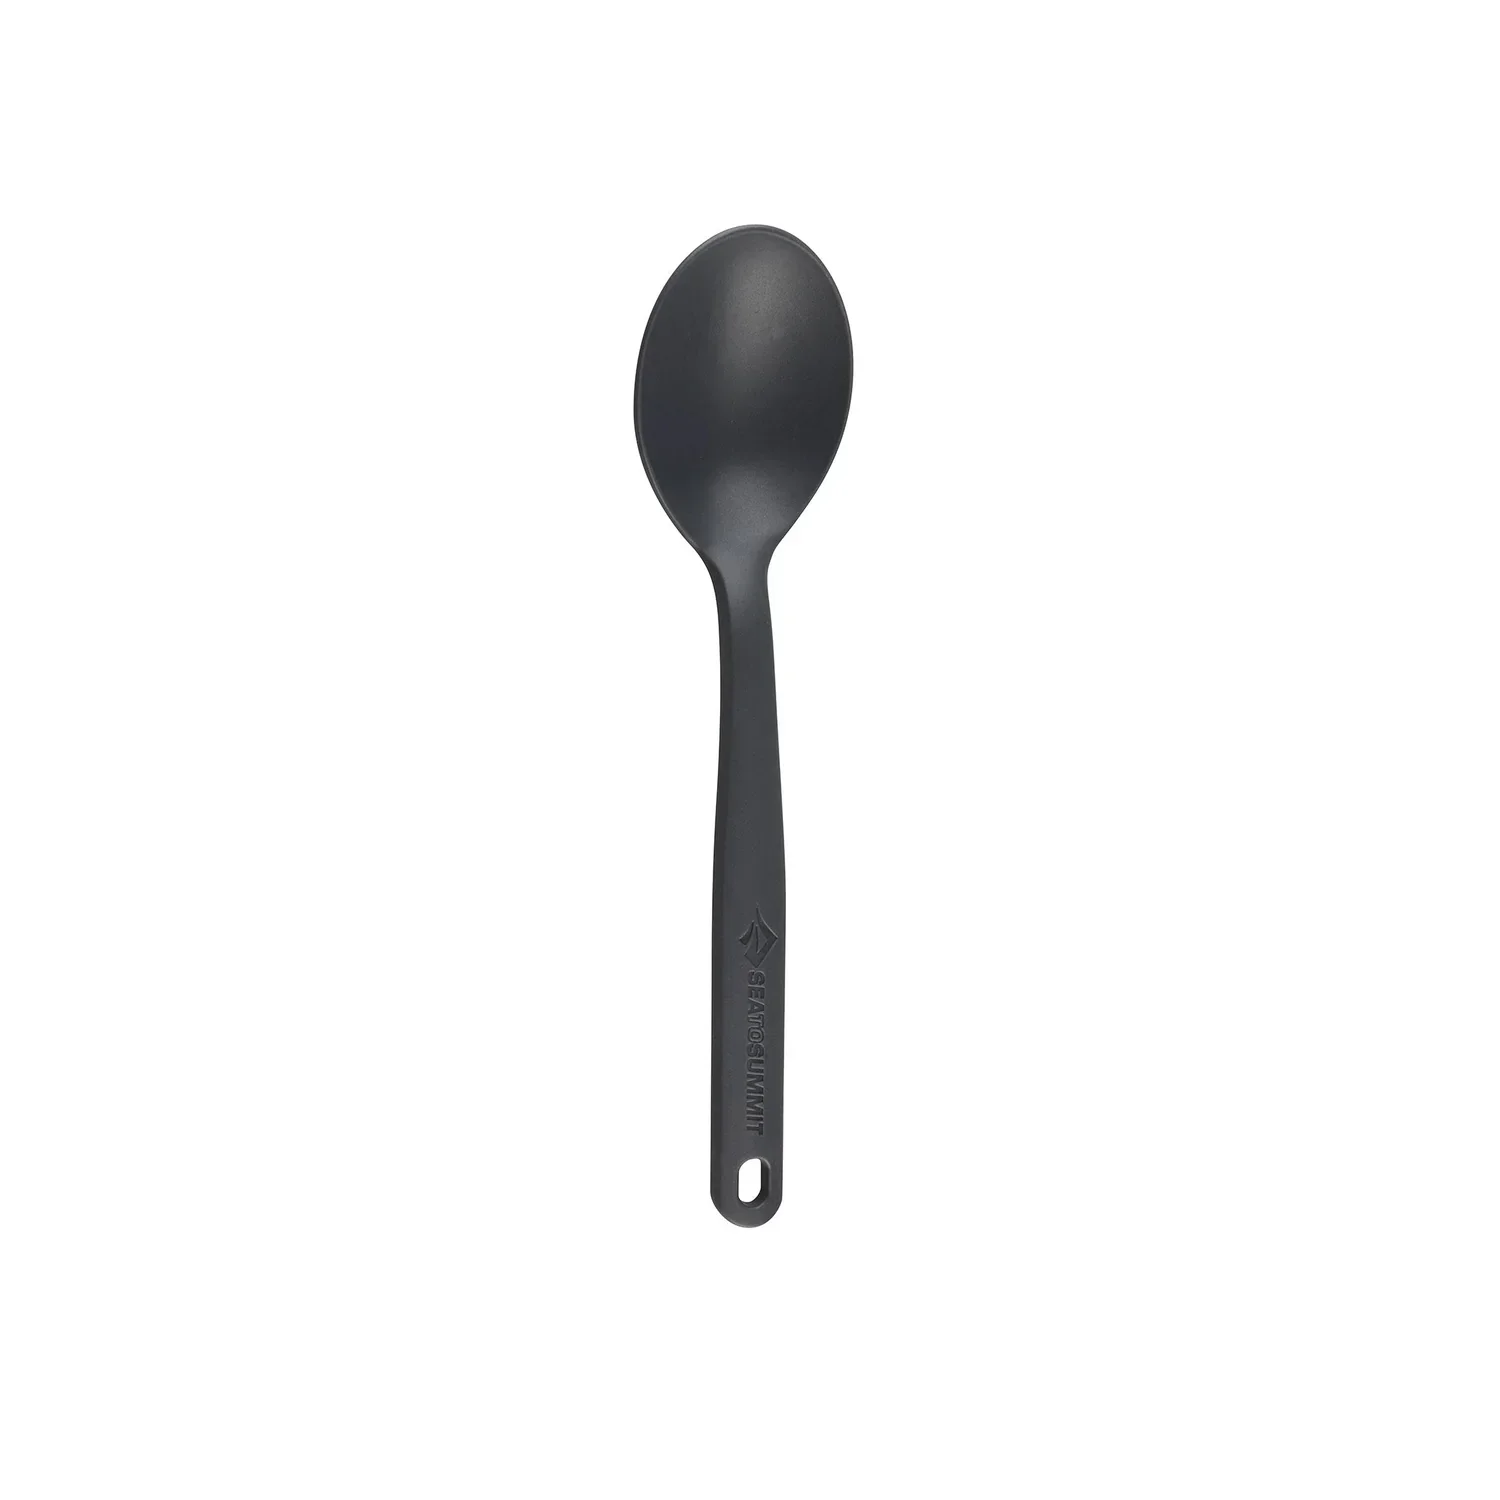 Camp_Cutlery_Spoon___Charcoal_3a110d7d-af00-4c63-9ef2-bc8eae50eb69